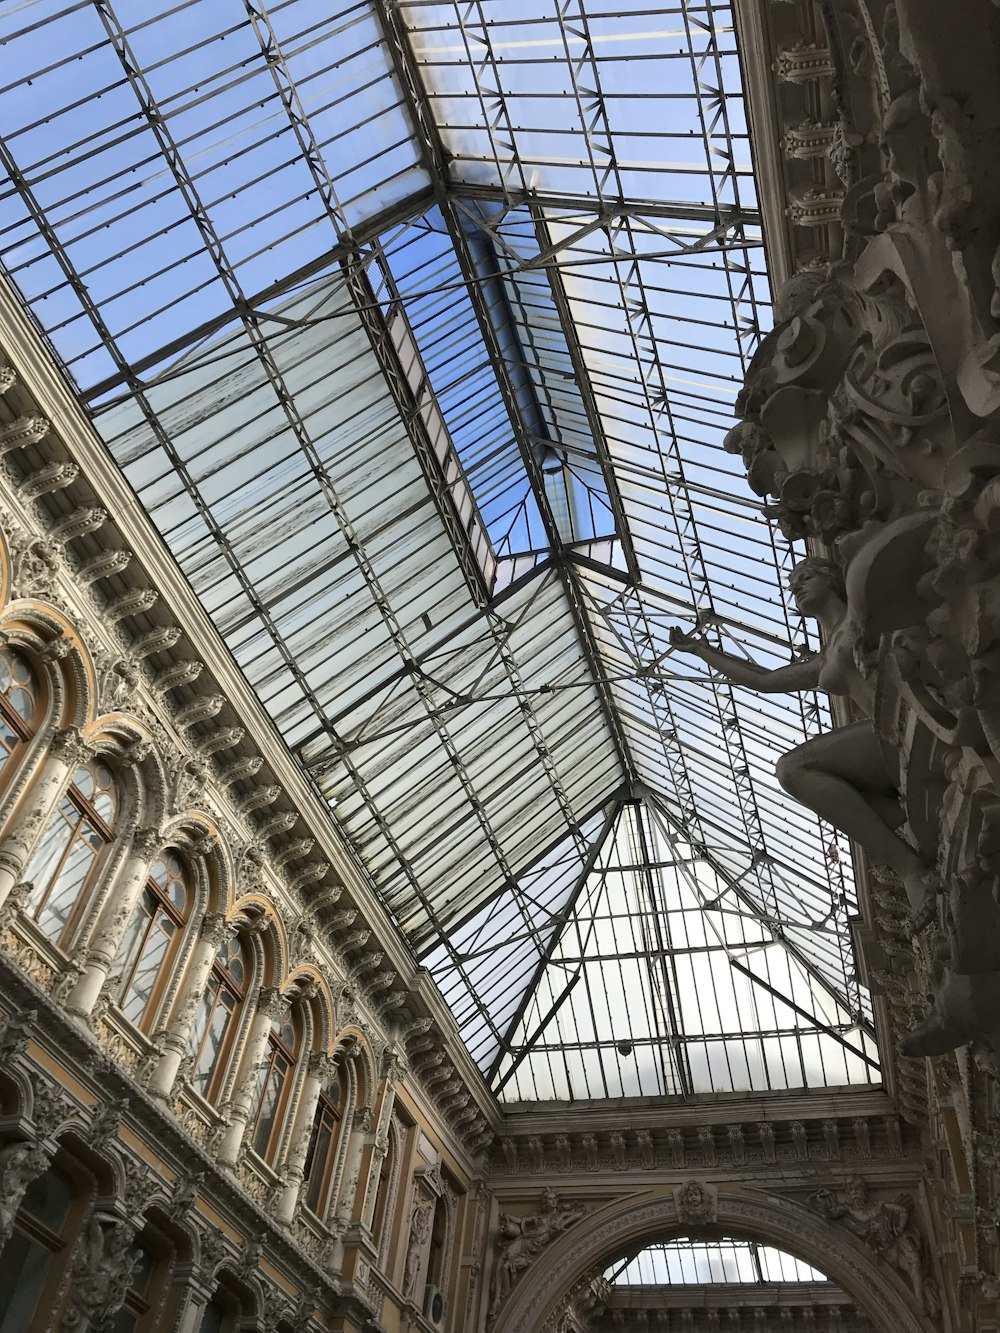 the ceiling of a building with a glass roof